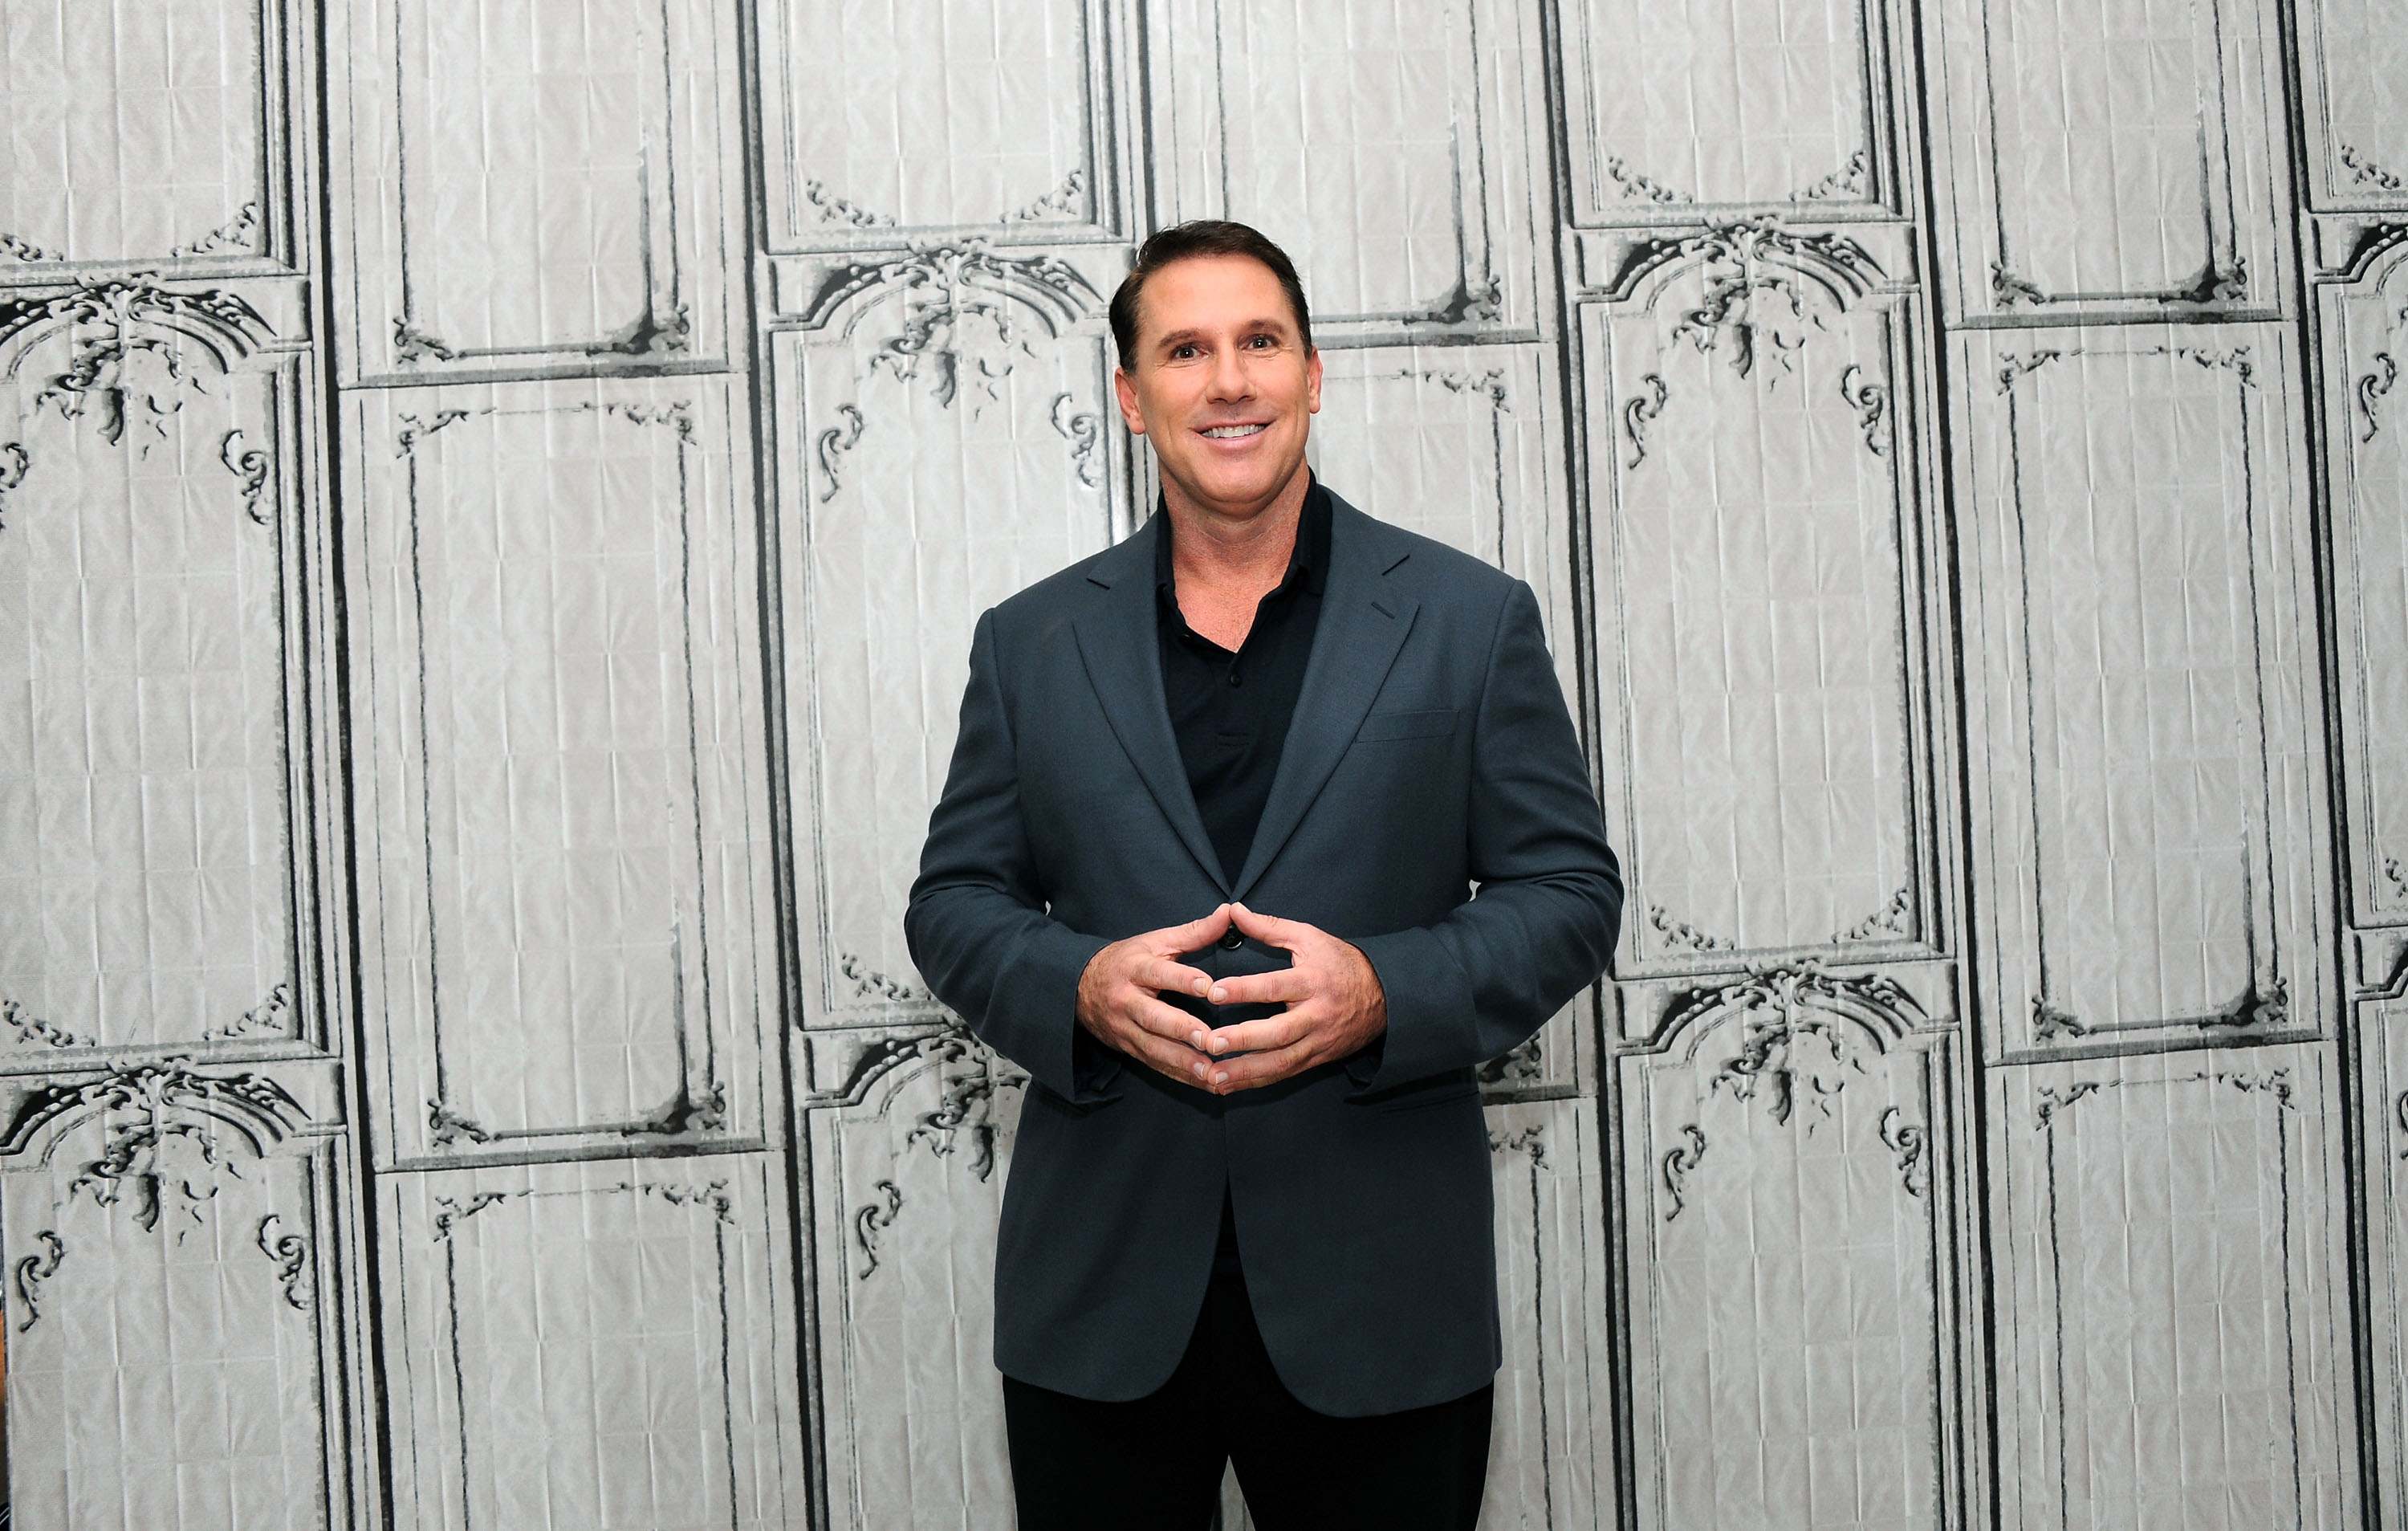 Writer Nicholas Sparks at AOL Studios In New York on October 15, 2015 in New York City. (Desiree Navarro—WireImage/Getty Images)